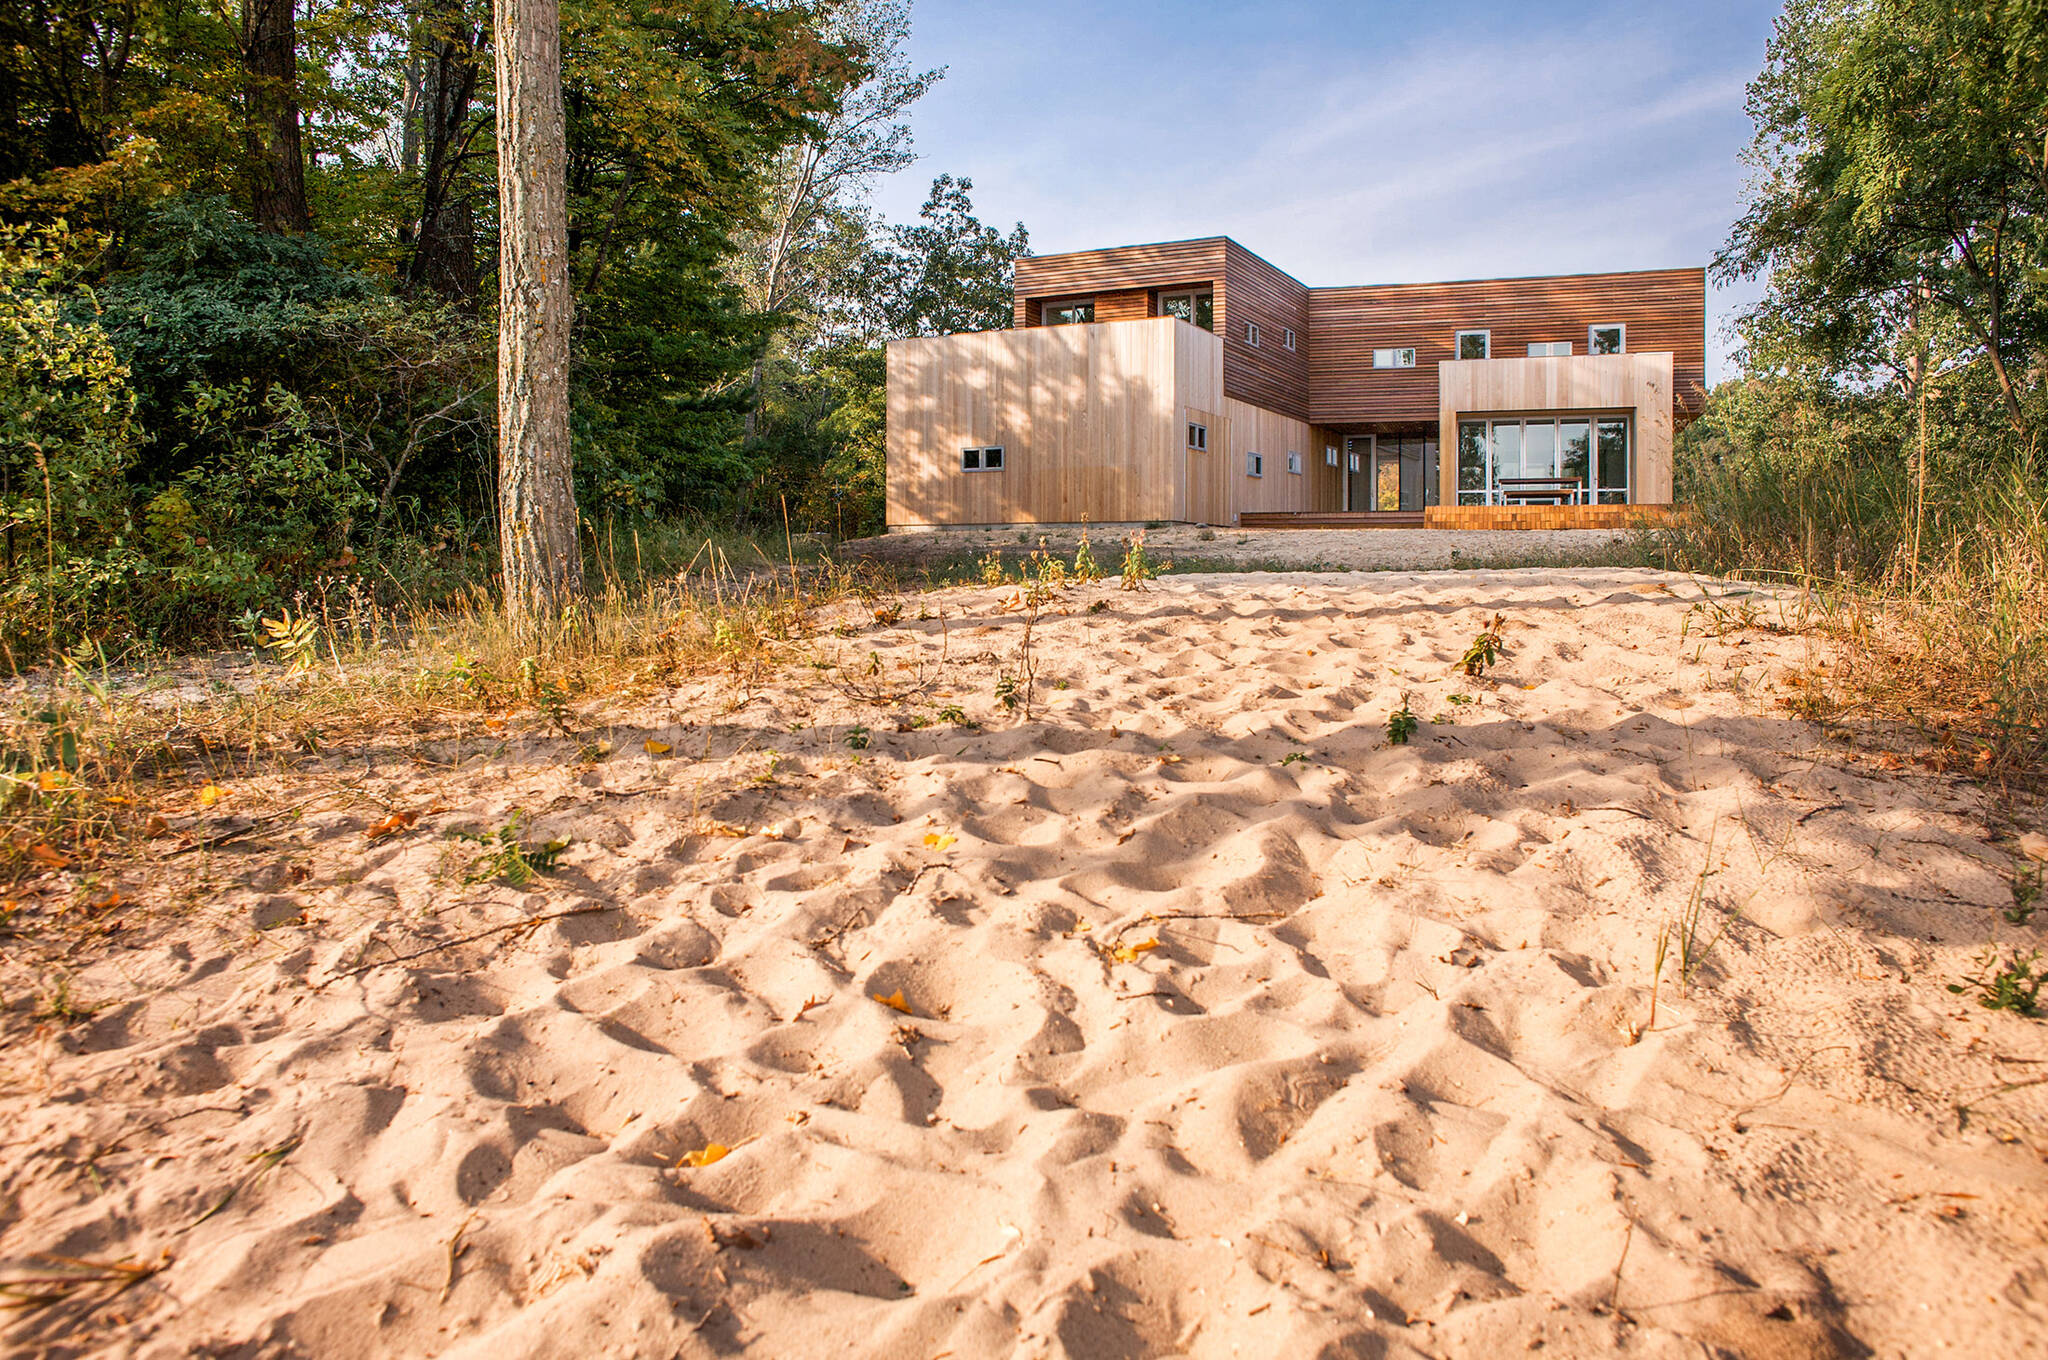 View from the beach of the sustainable lake house project in Omena, Michigan designed by the architecture studio Danny Forster & Architecture